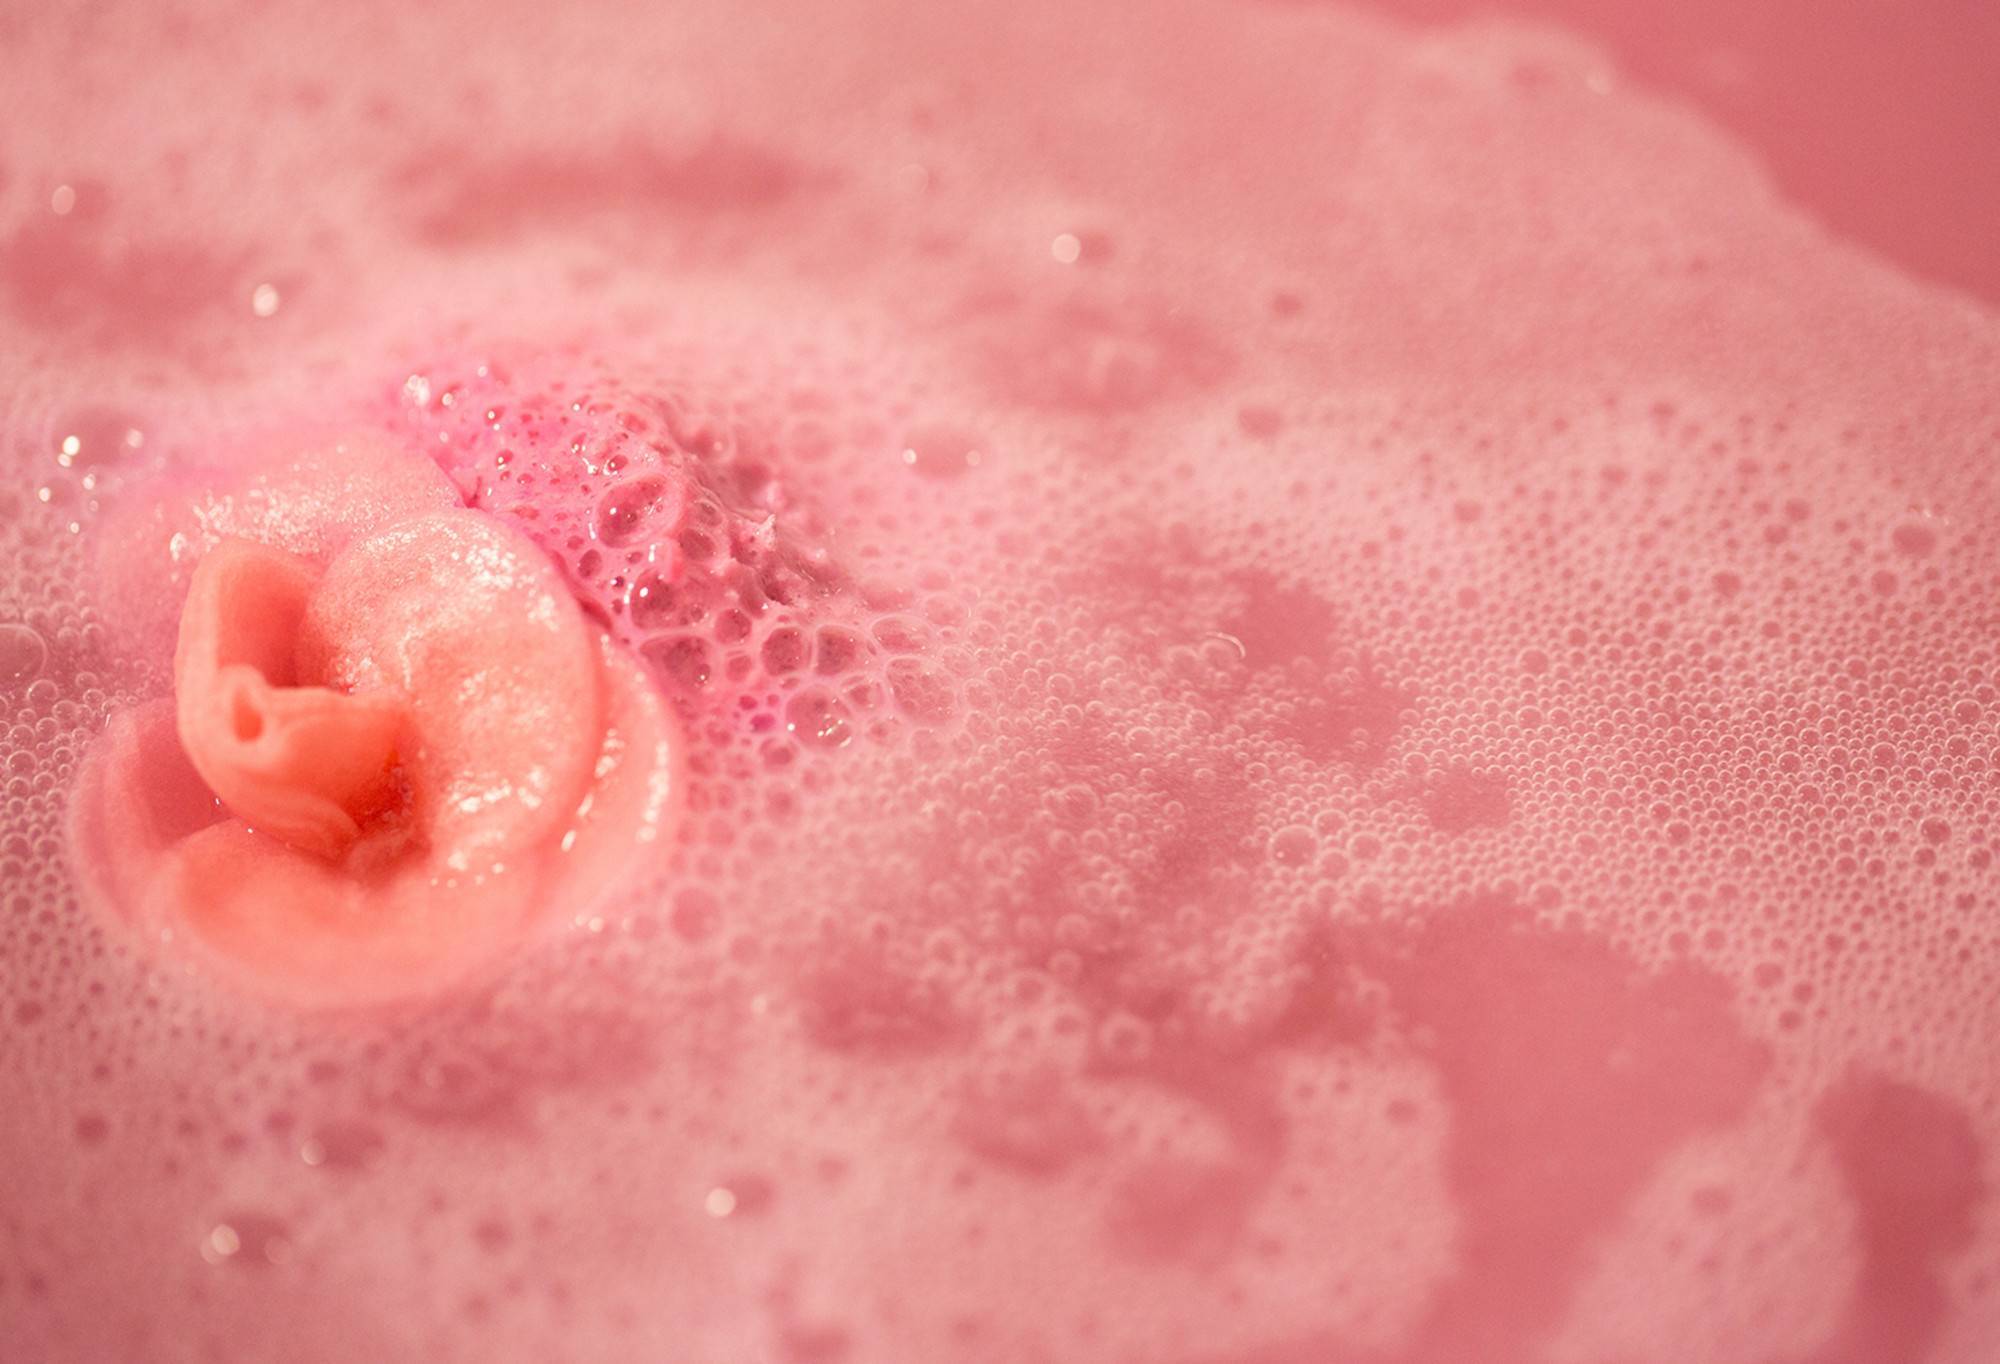 The Sex Bomb bath bomb has dissolved leaving behind silky, pink waters with the rice paper rose just visible over the blanket of pink bubbles. 